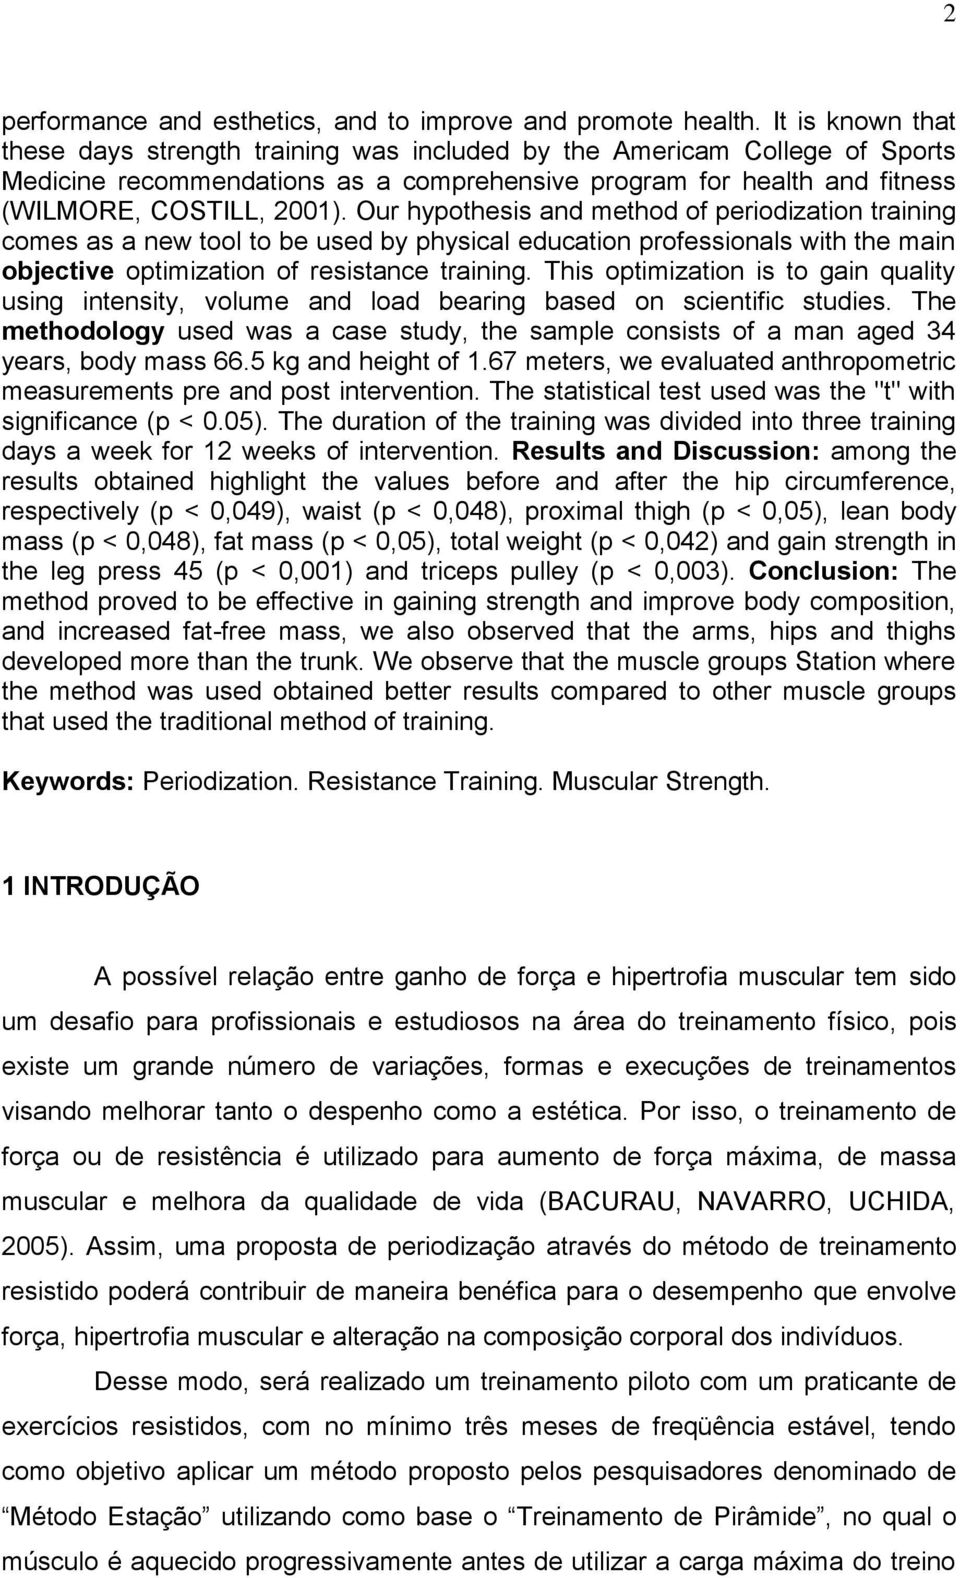 Our hypothesis and method of periodization training comes as a new tool to be used by physical education professionals with the main objective optimization of resistance training.